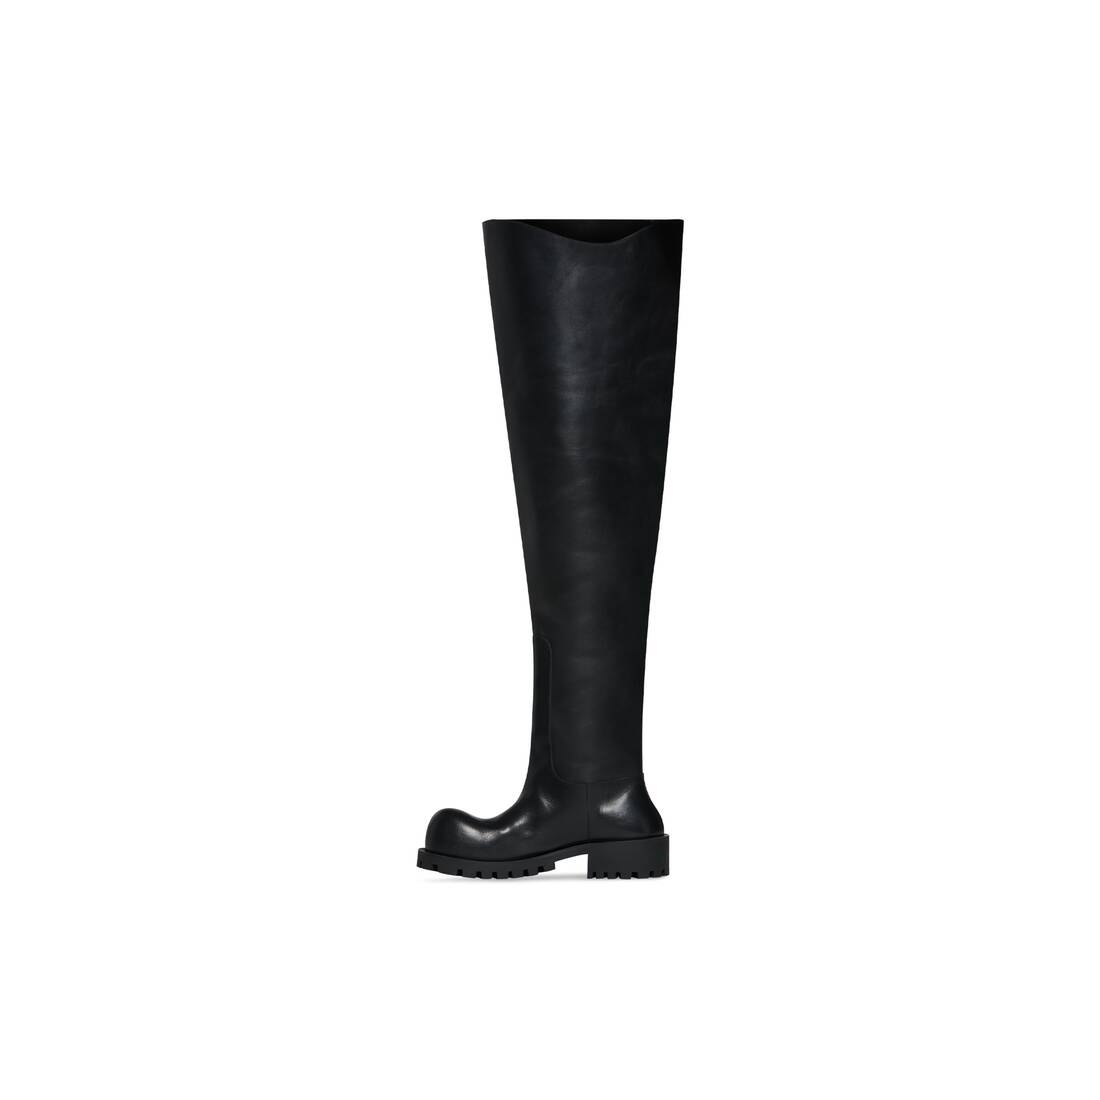 hummer over-the-knee boot - 4